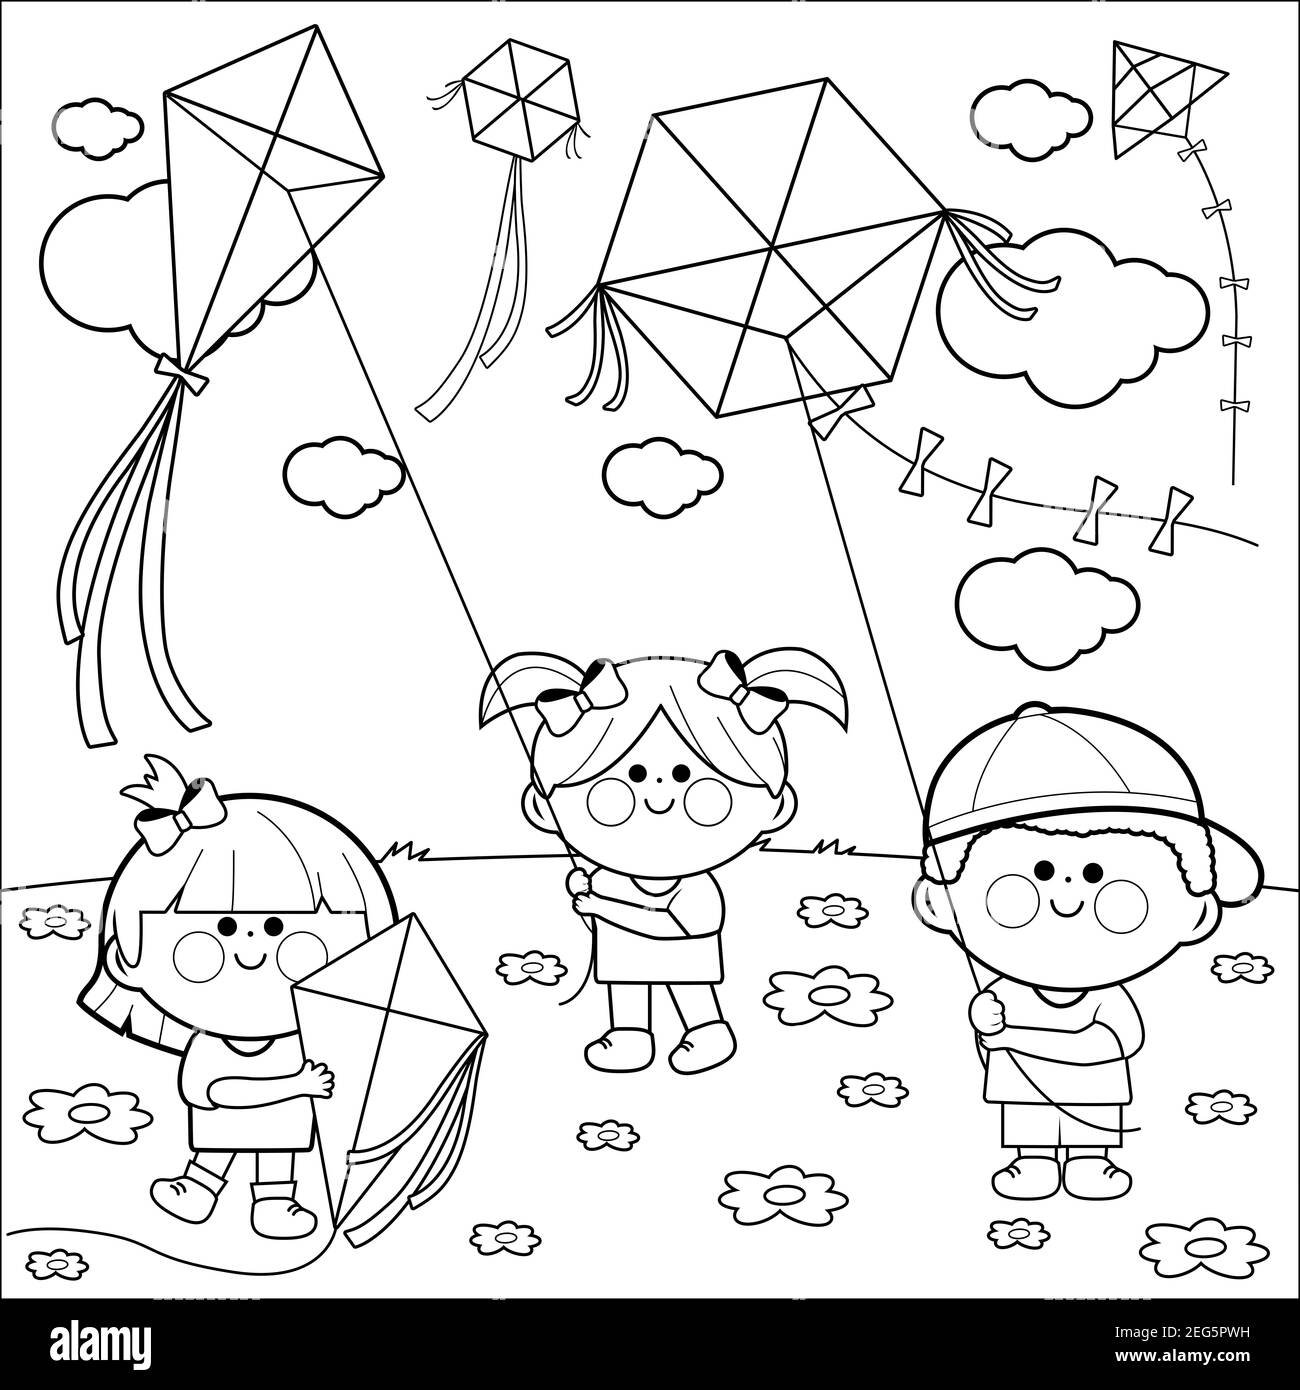 Children flying kites. Black and white coloring page. Stock Photo